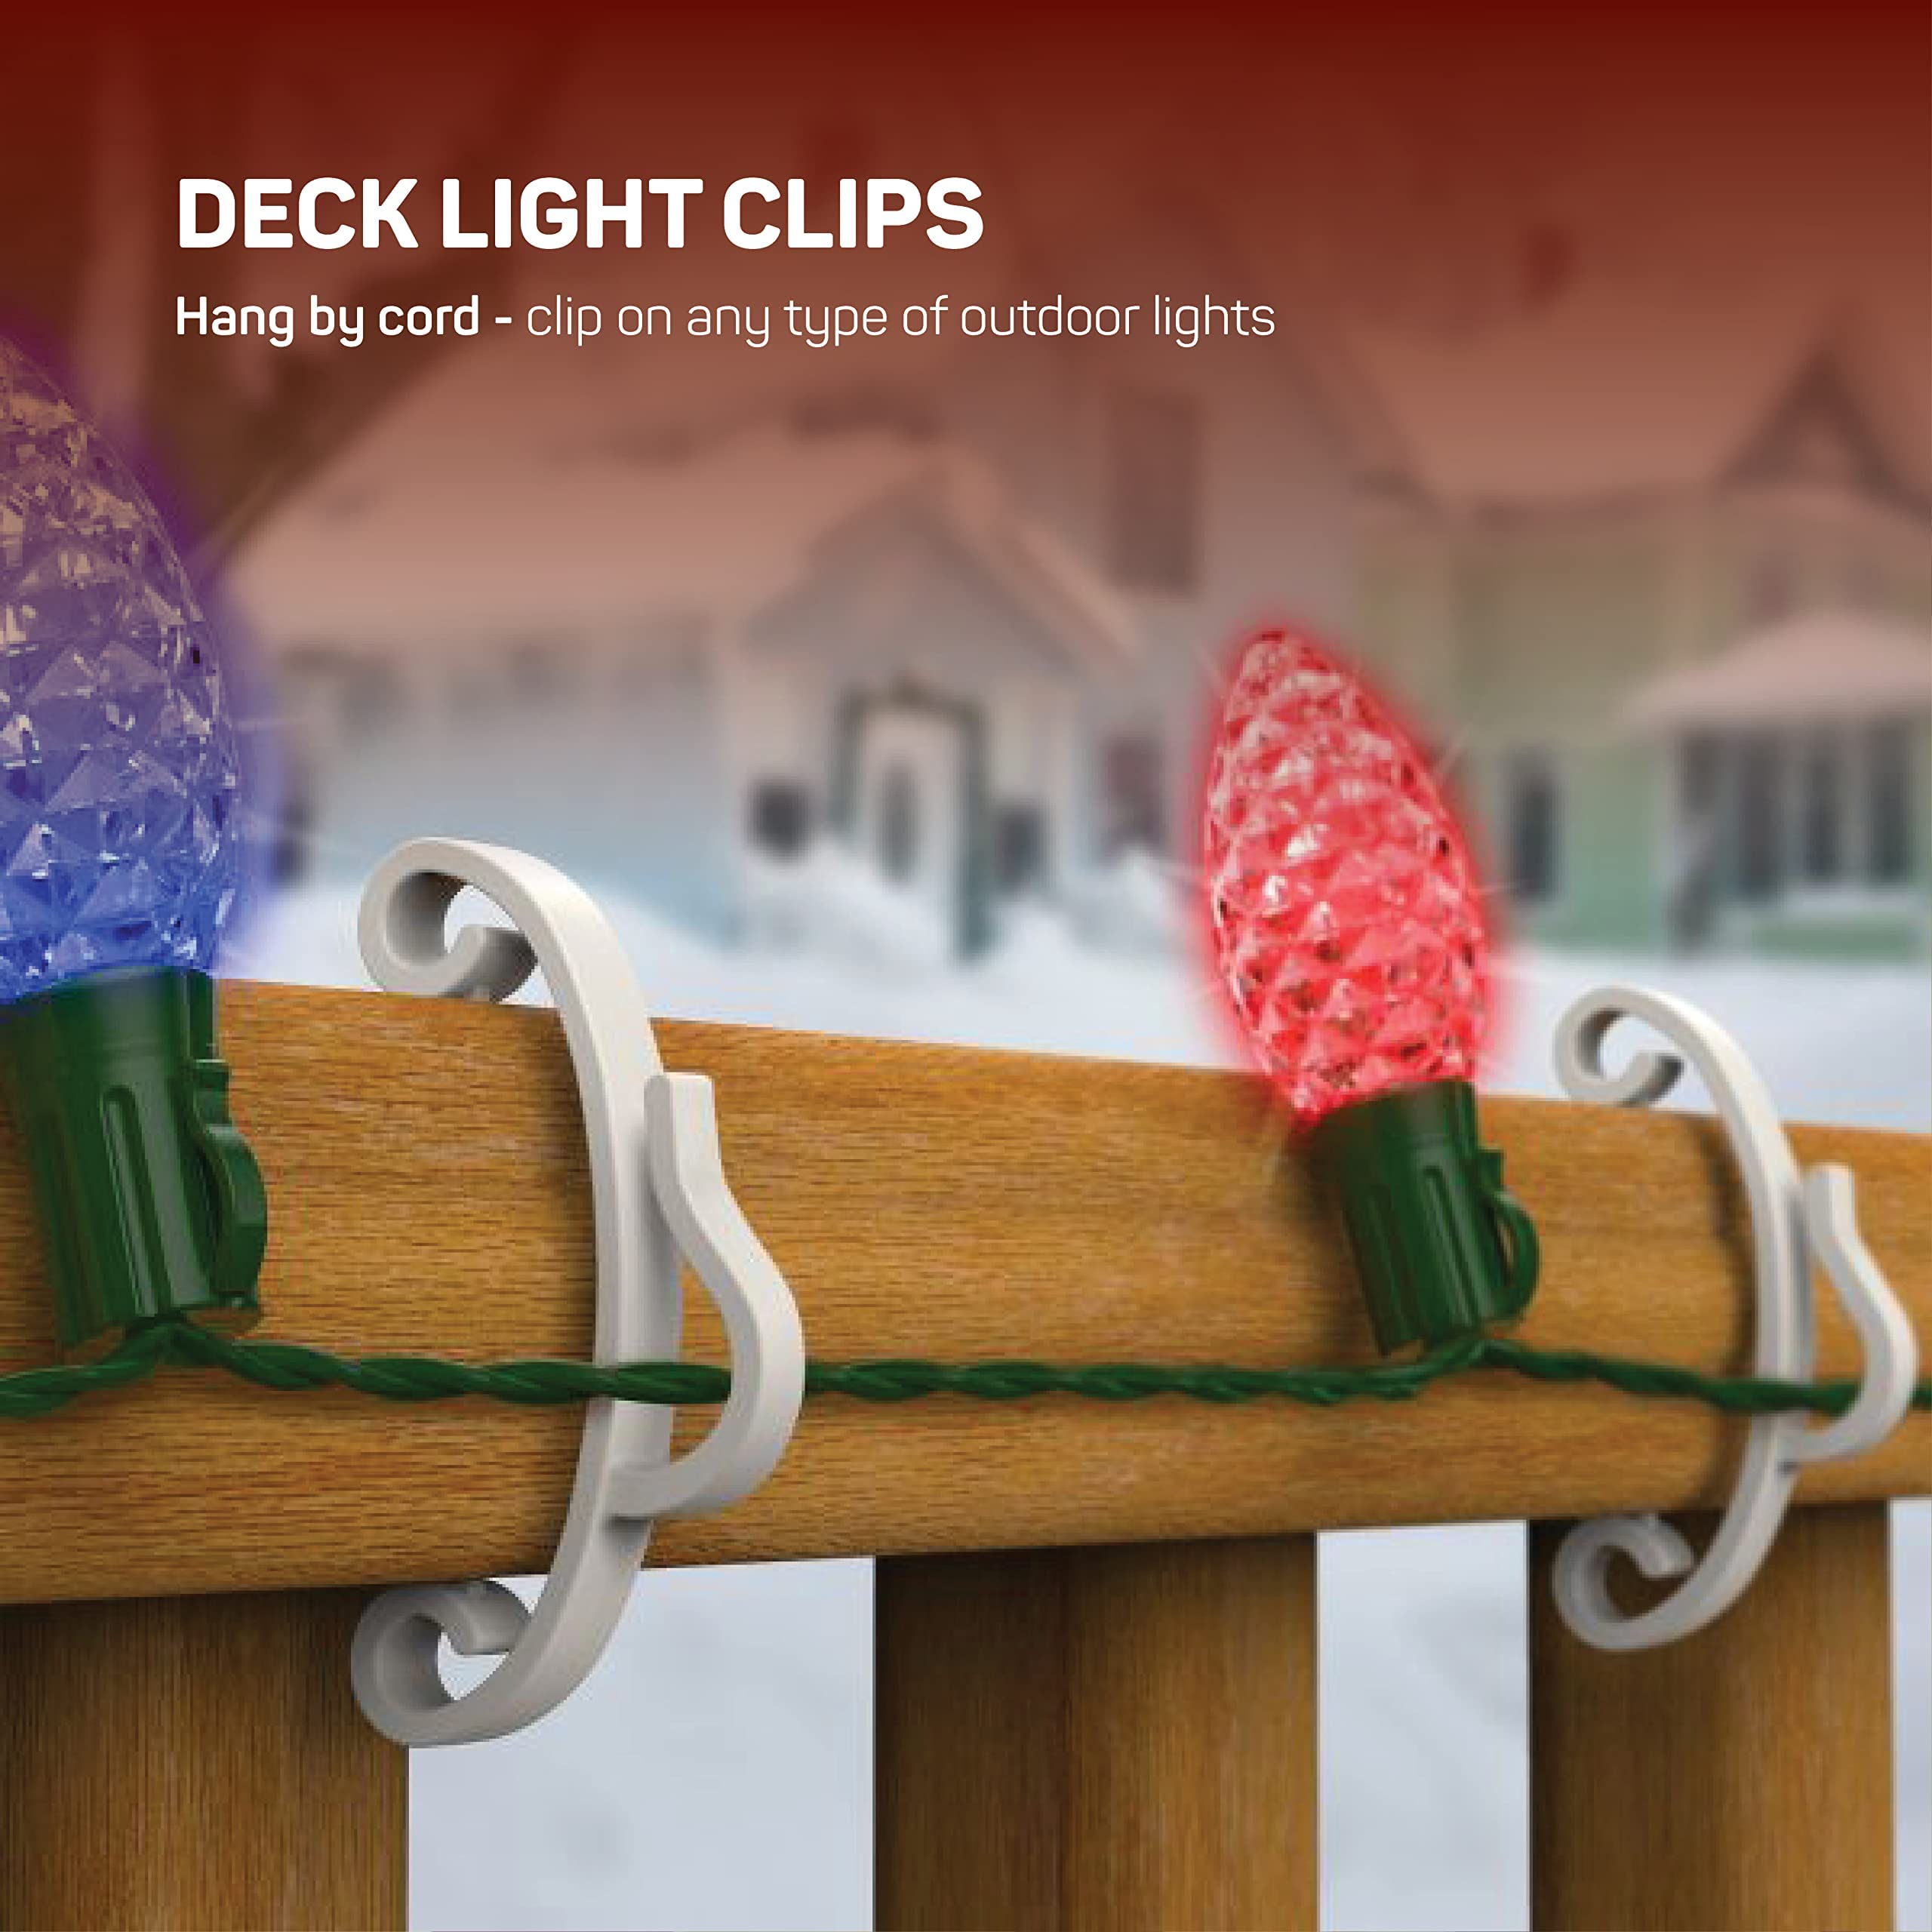 Holiday Light Clips [Set of 100] Deck light Clips - Fascia Boards Clips, Banister light clips - Mount to Decks, Roof Eaves, Fence, And Staircases. Christmas light clips - Made In USA No Tools Required  - Very Good